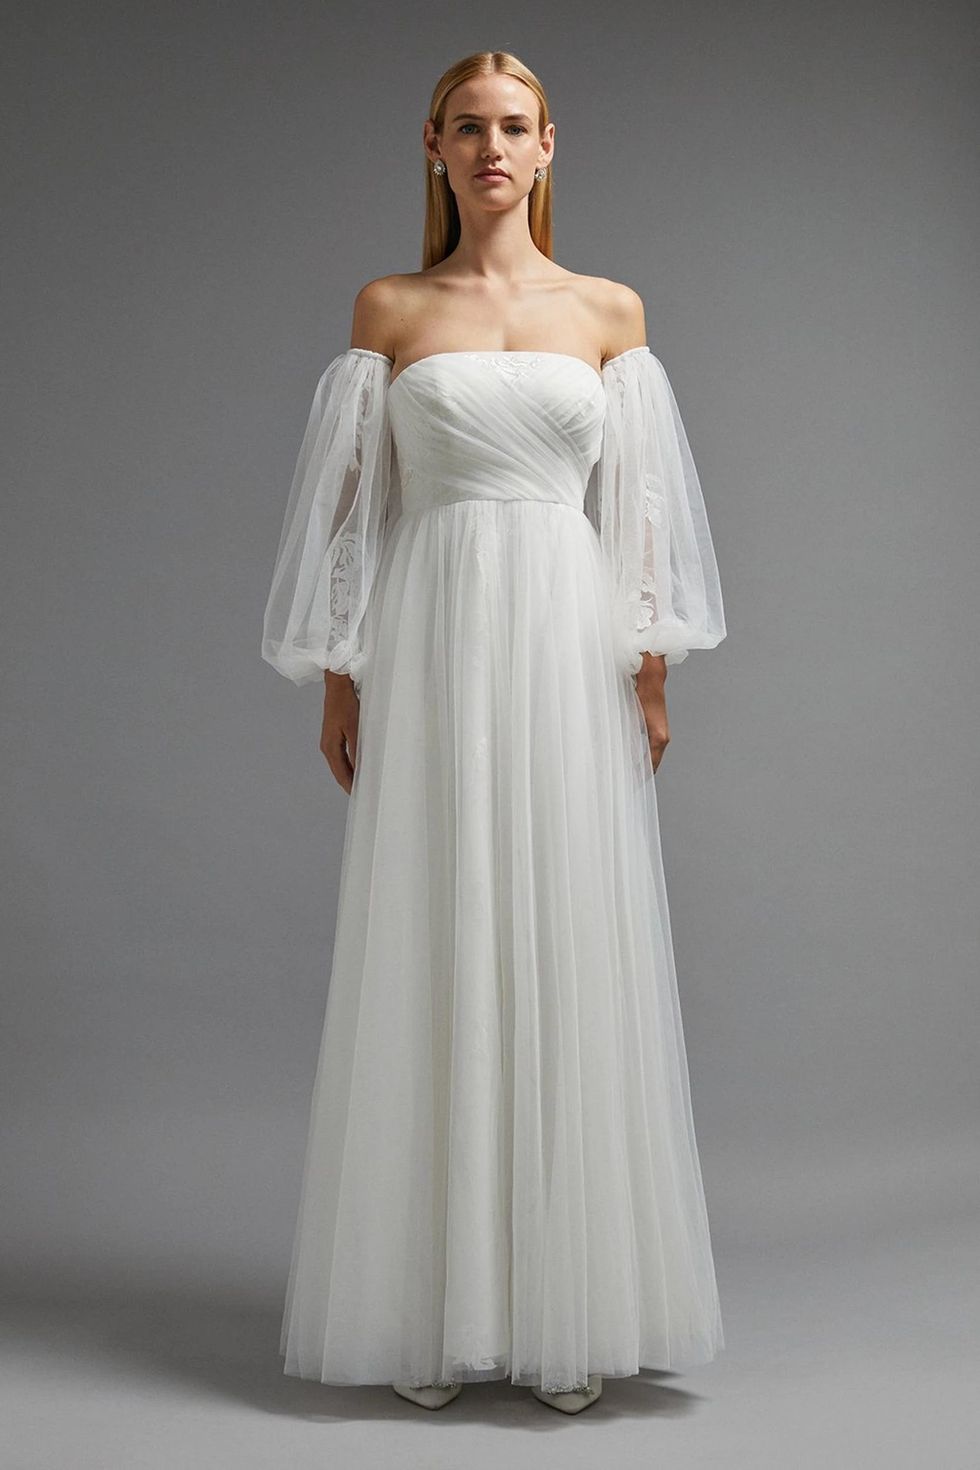 6 of the best maternity wedding dresses to buy now